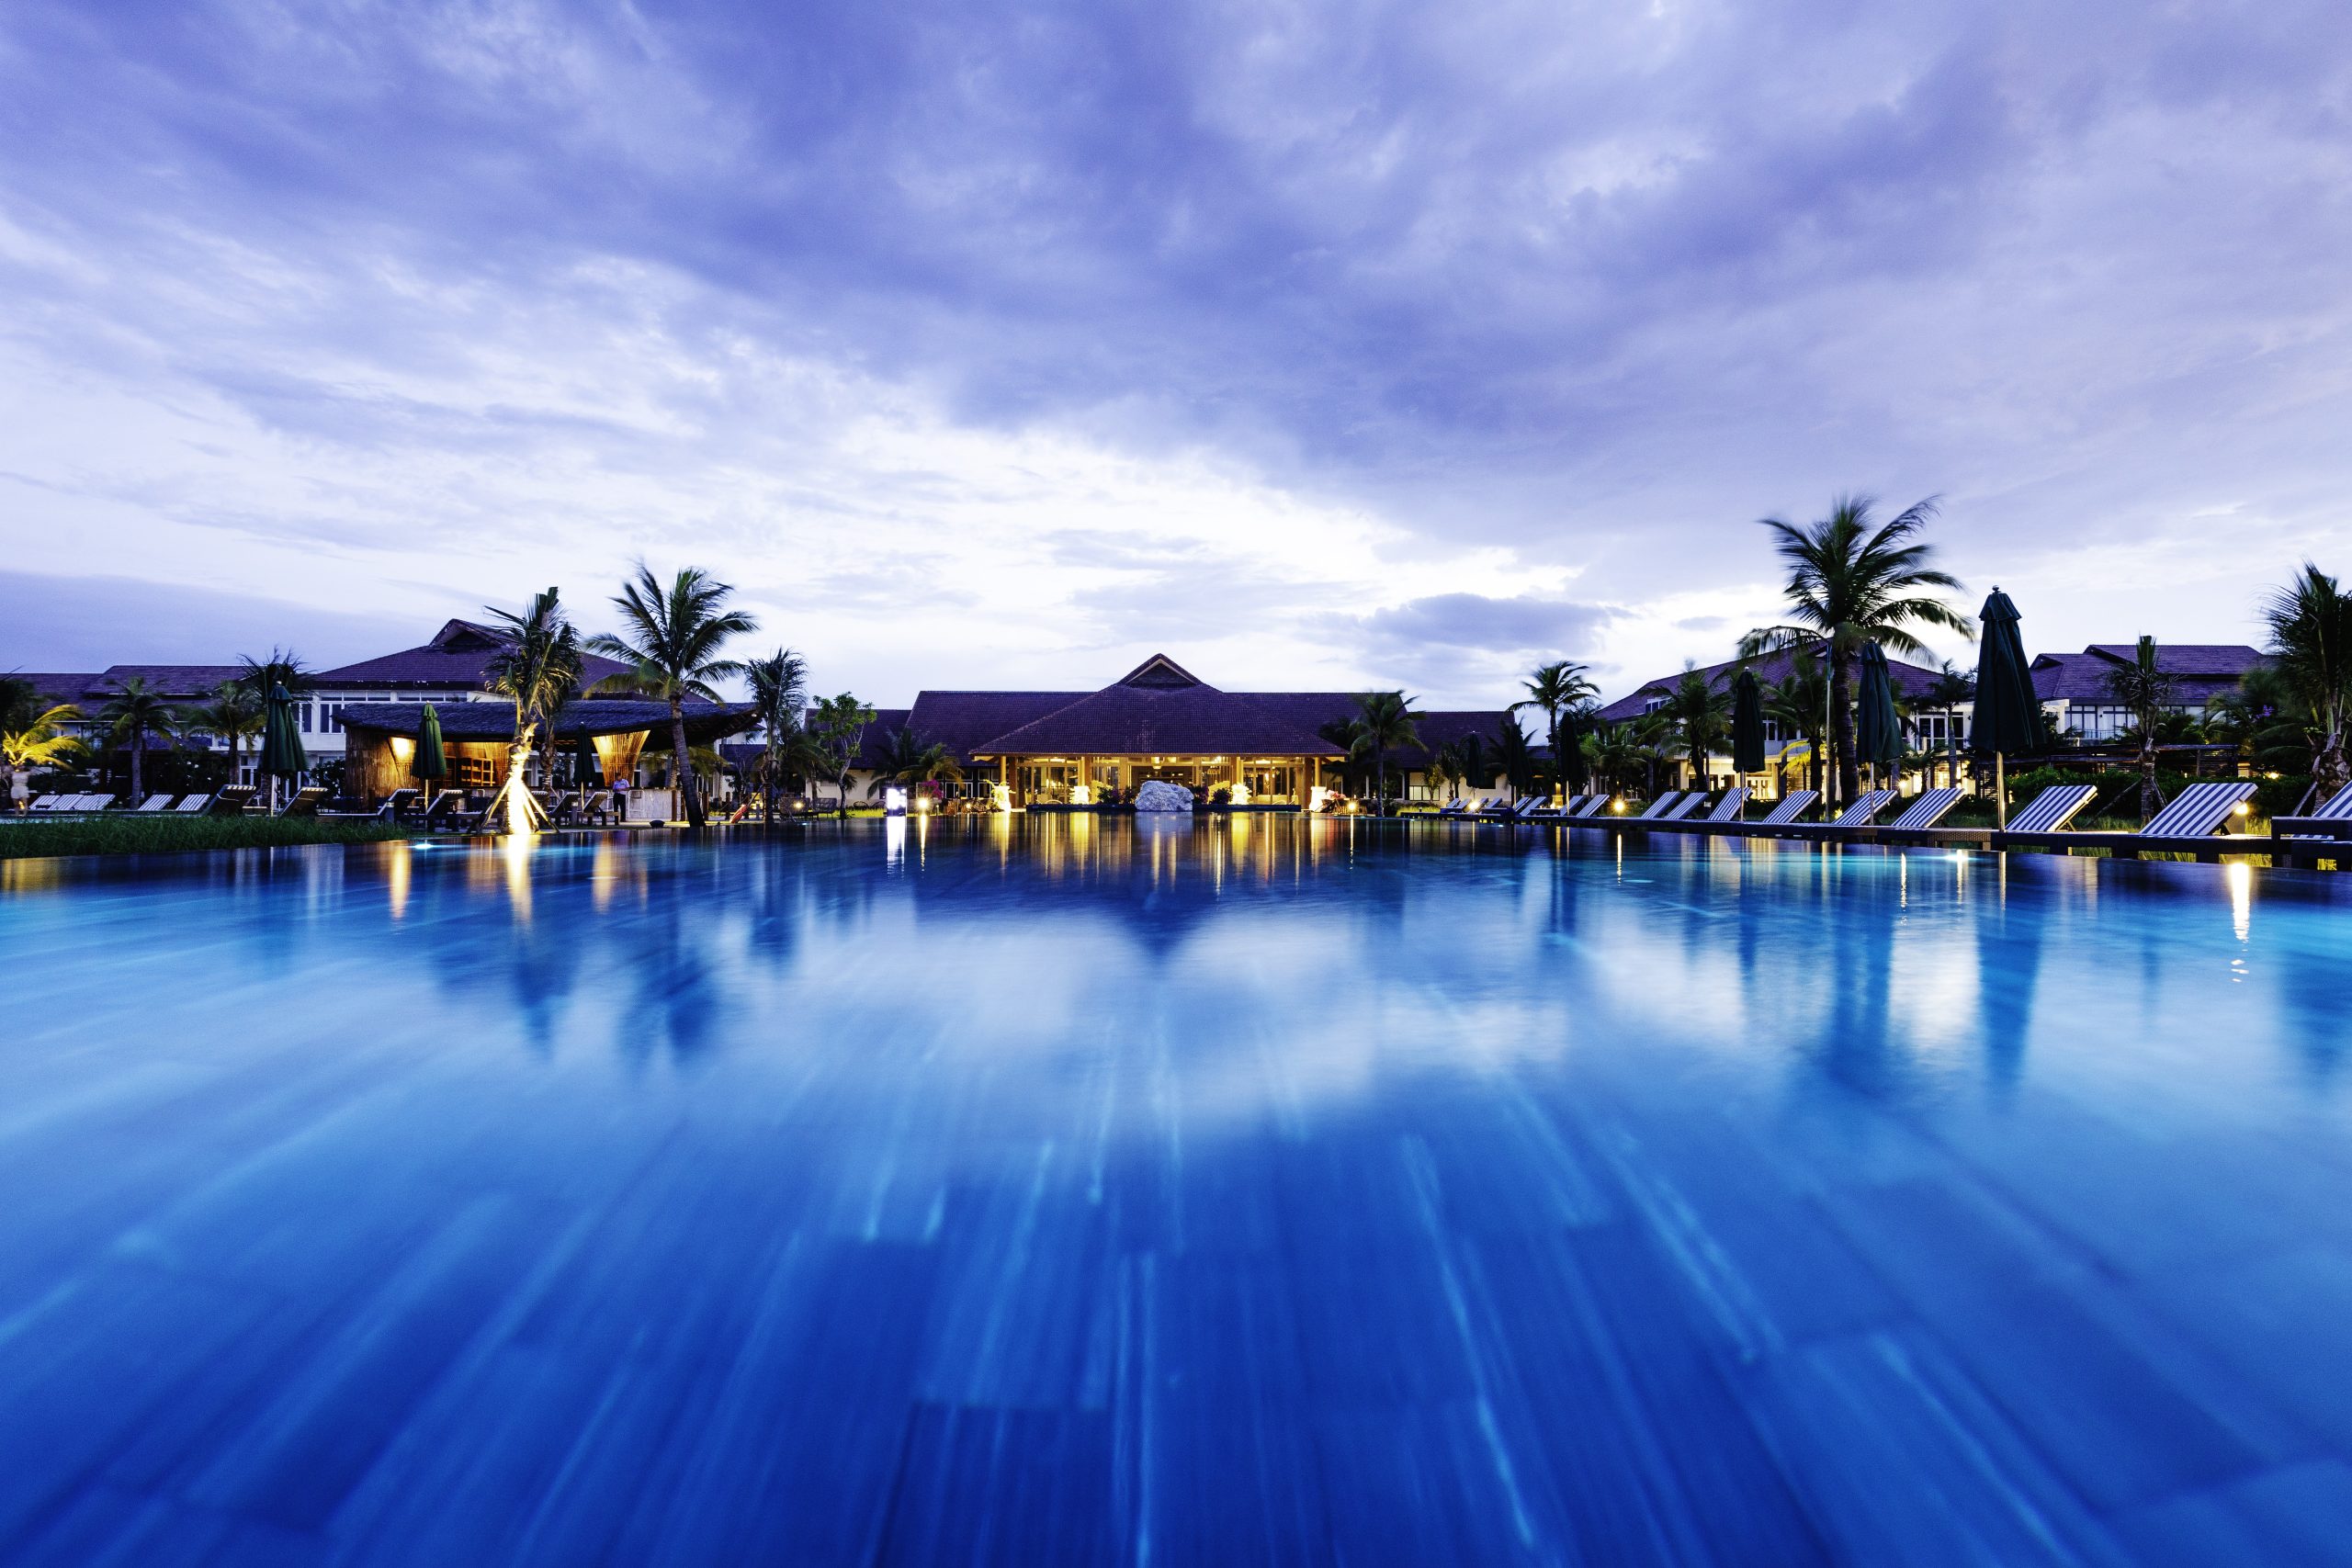 Relax in the outdoor infinity pools of the resort.